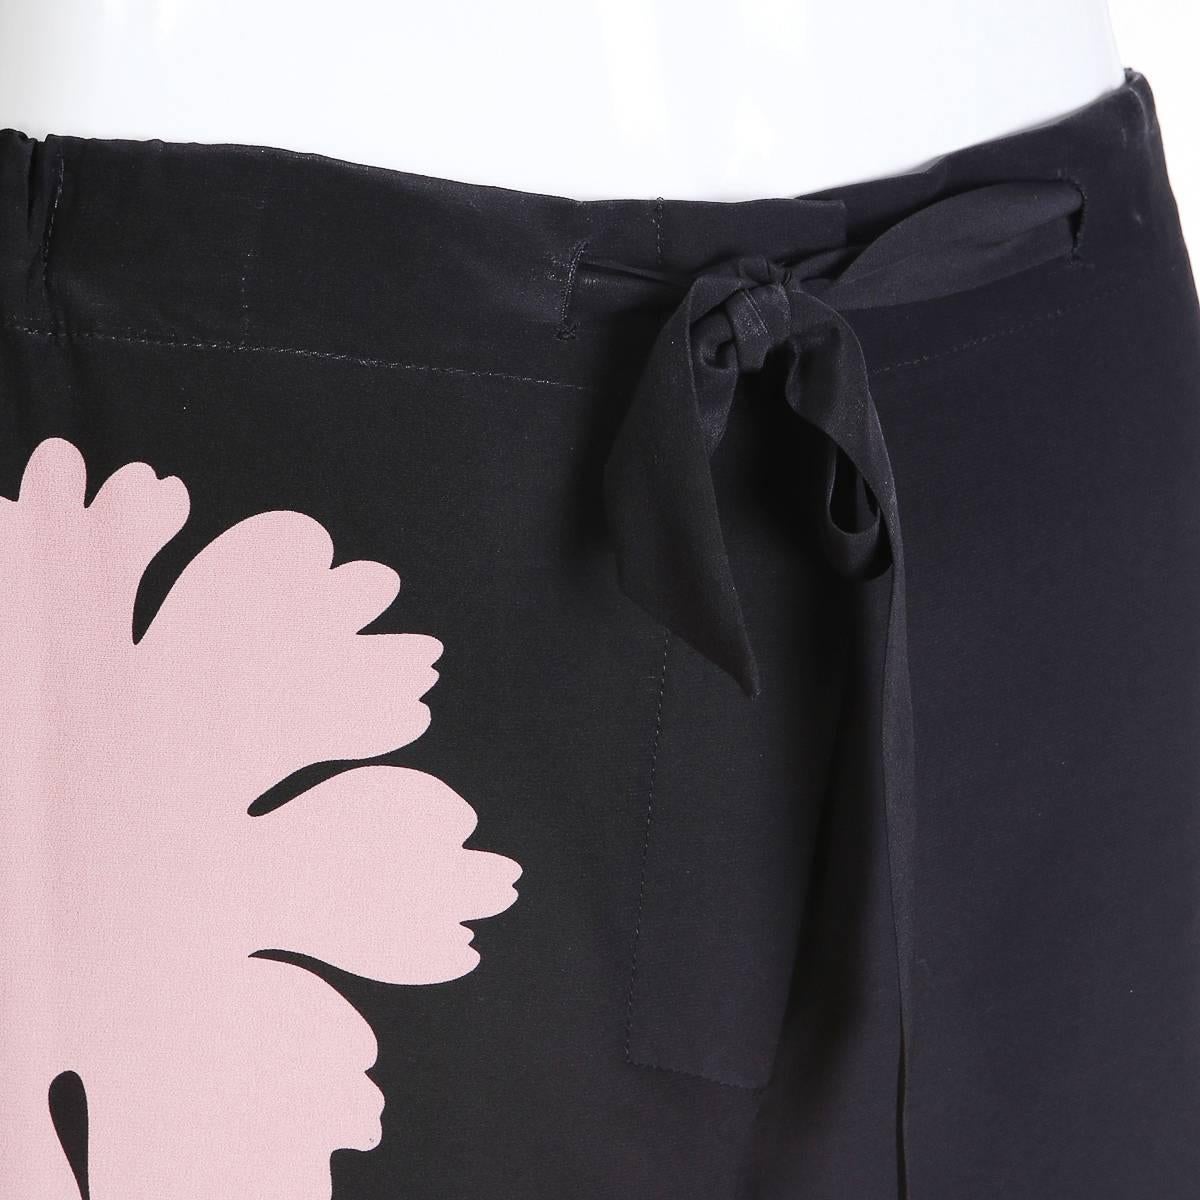 Black Alexander McQueen Cropped Silk Pants with Large Scale Floral Print